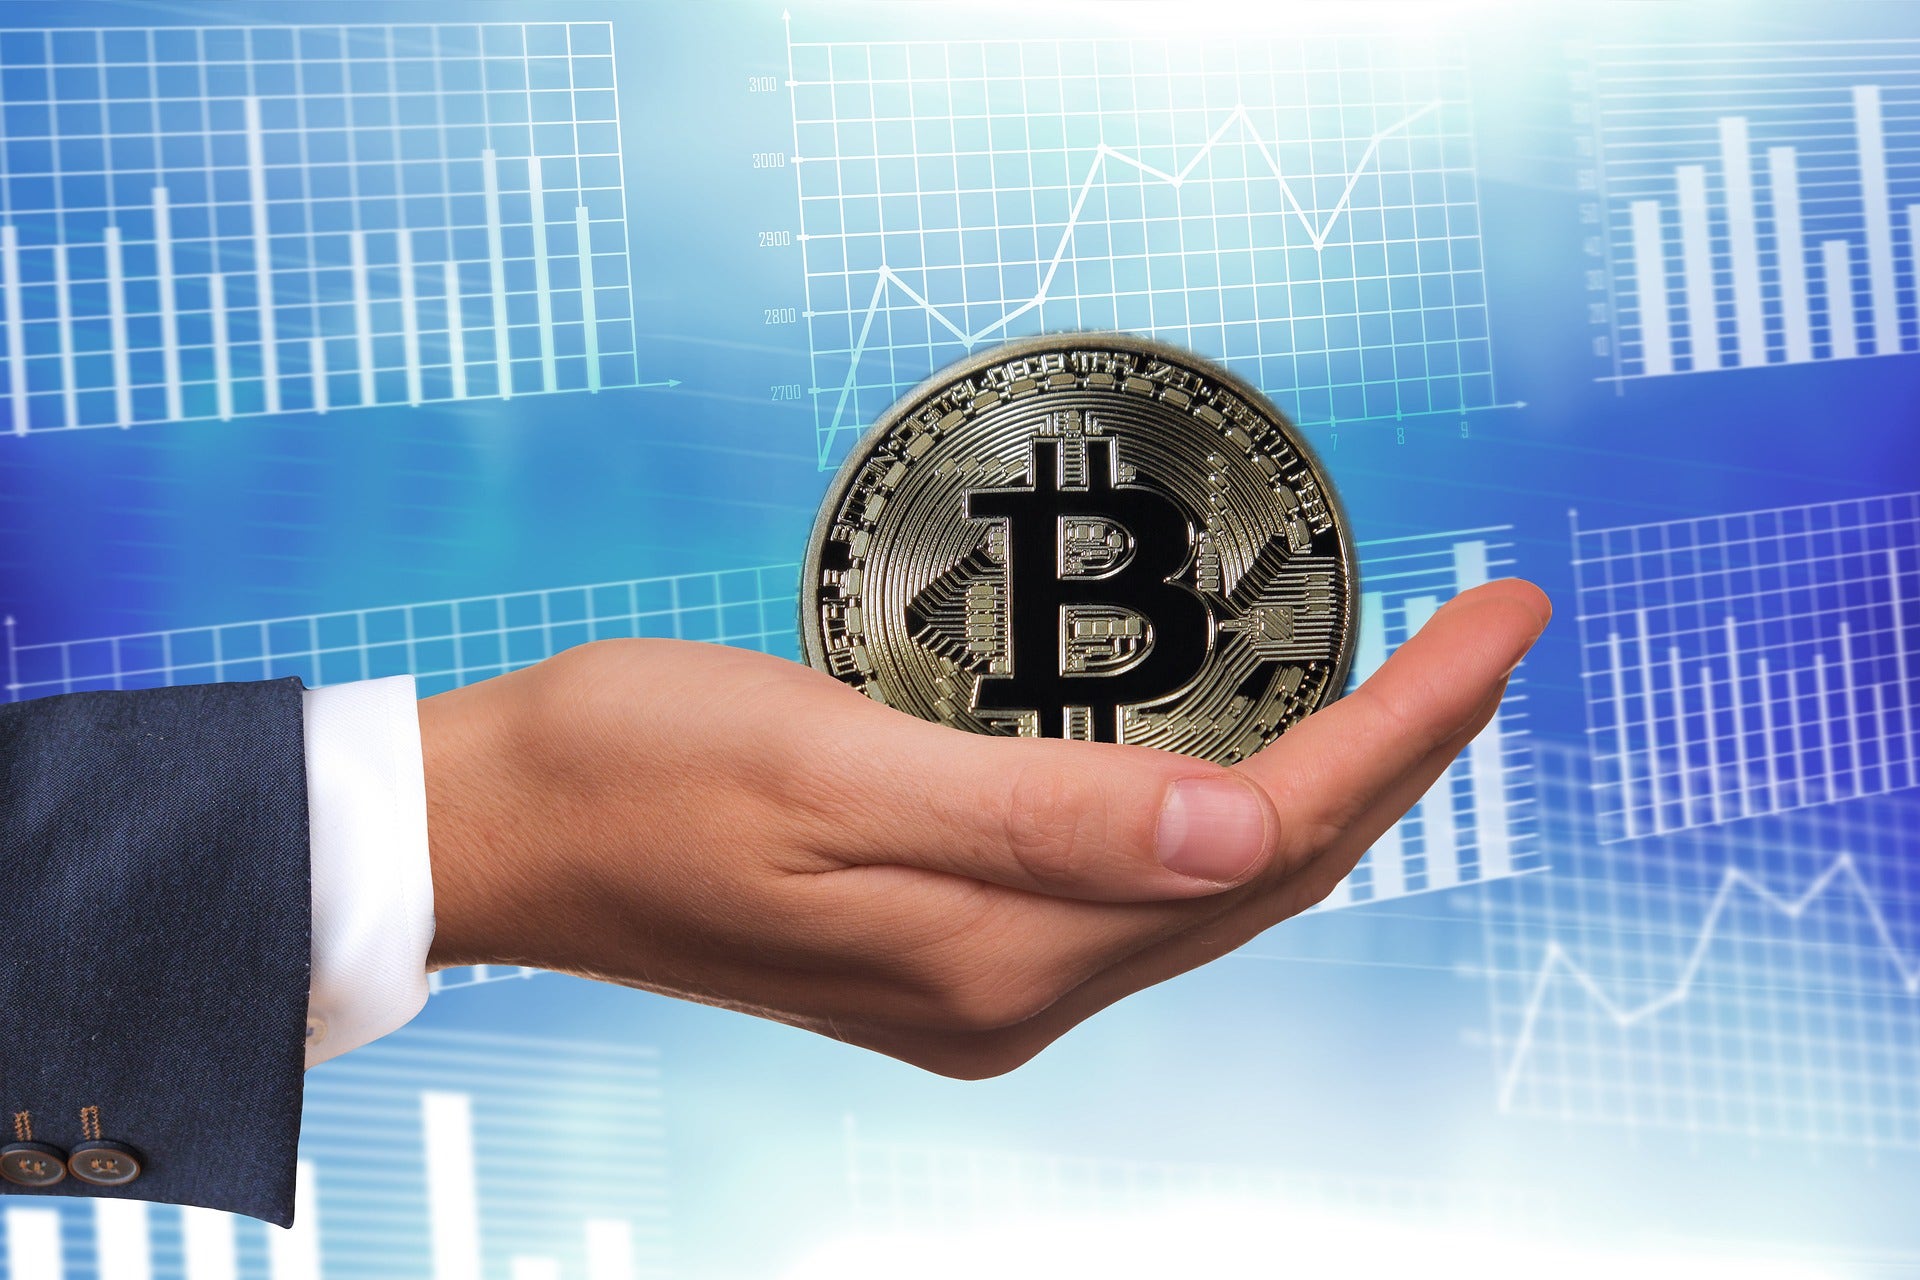 Mayor Wants His City To Accept Bitcoin For Property Tax Payments